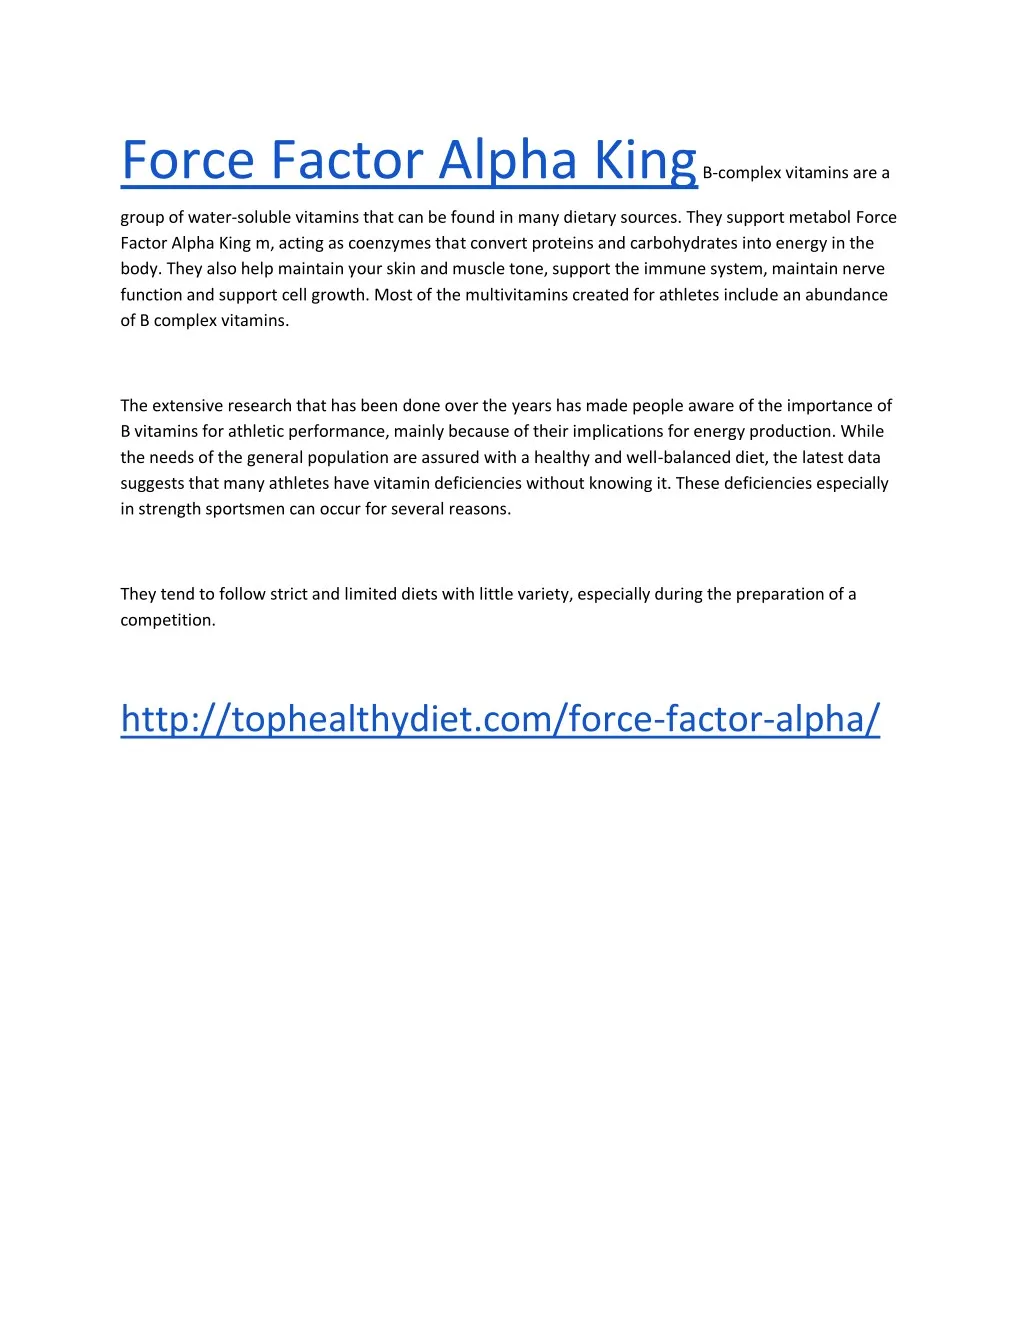 force factor alpha king b complex vitamins are a